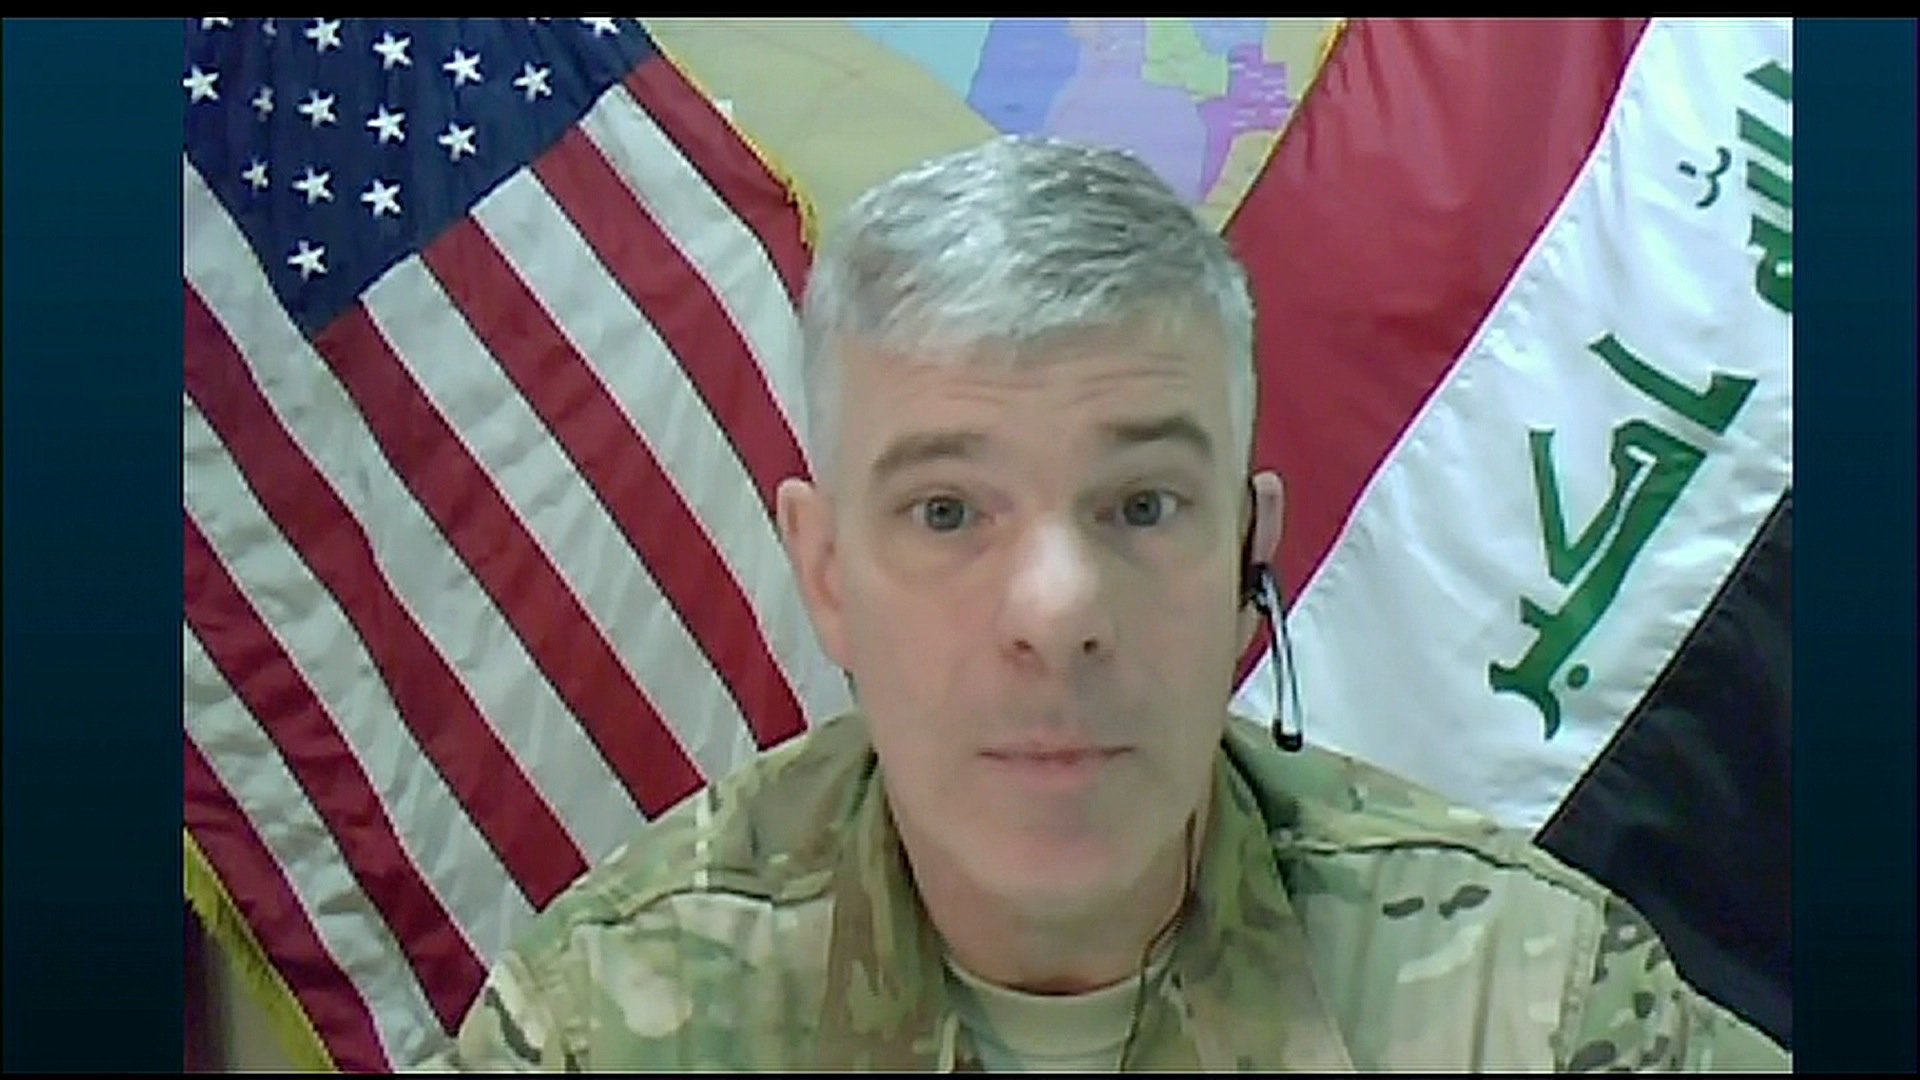 Operation Inherent Resolve Spokesman Col. Steve Warren conducts a press briefing via teleconference from Baghdad.